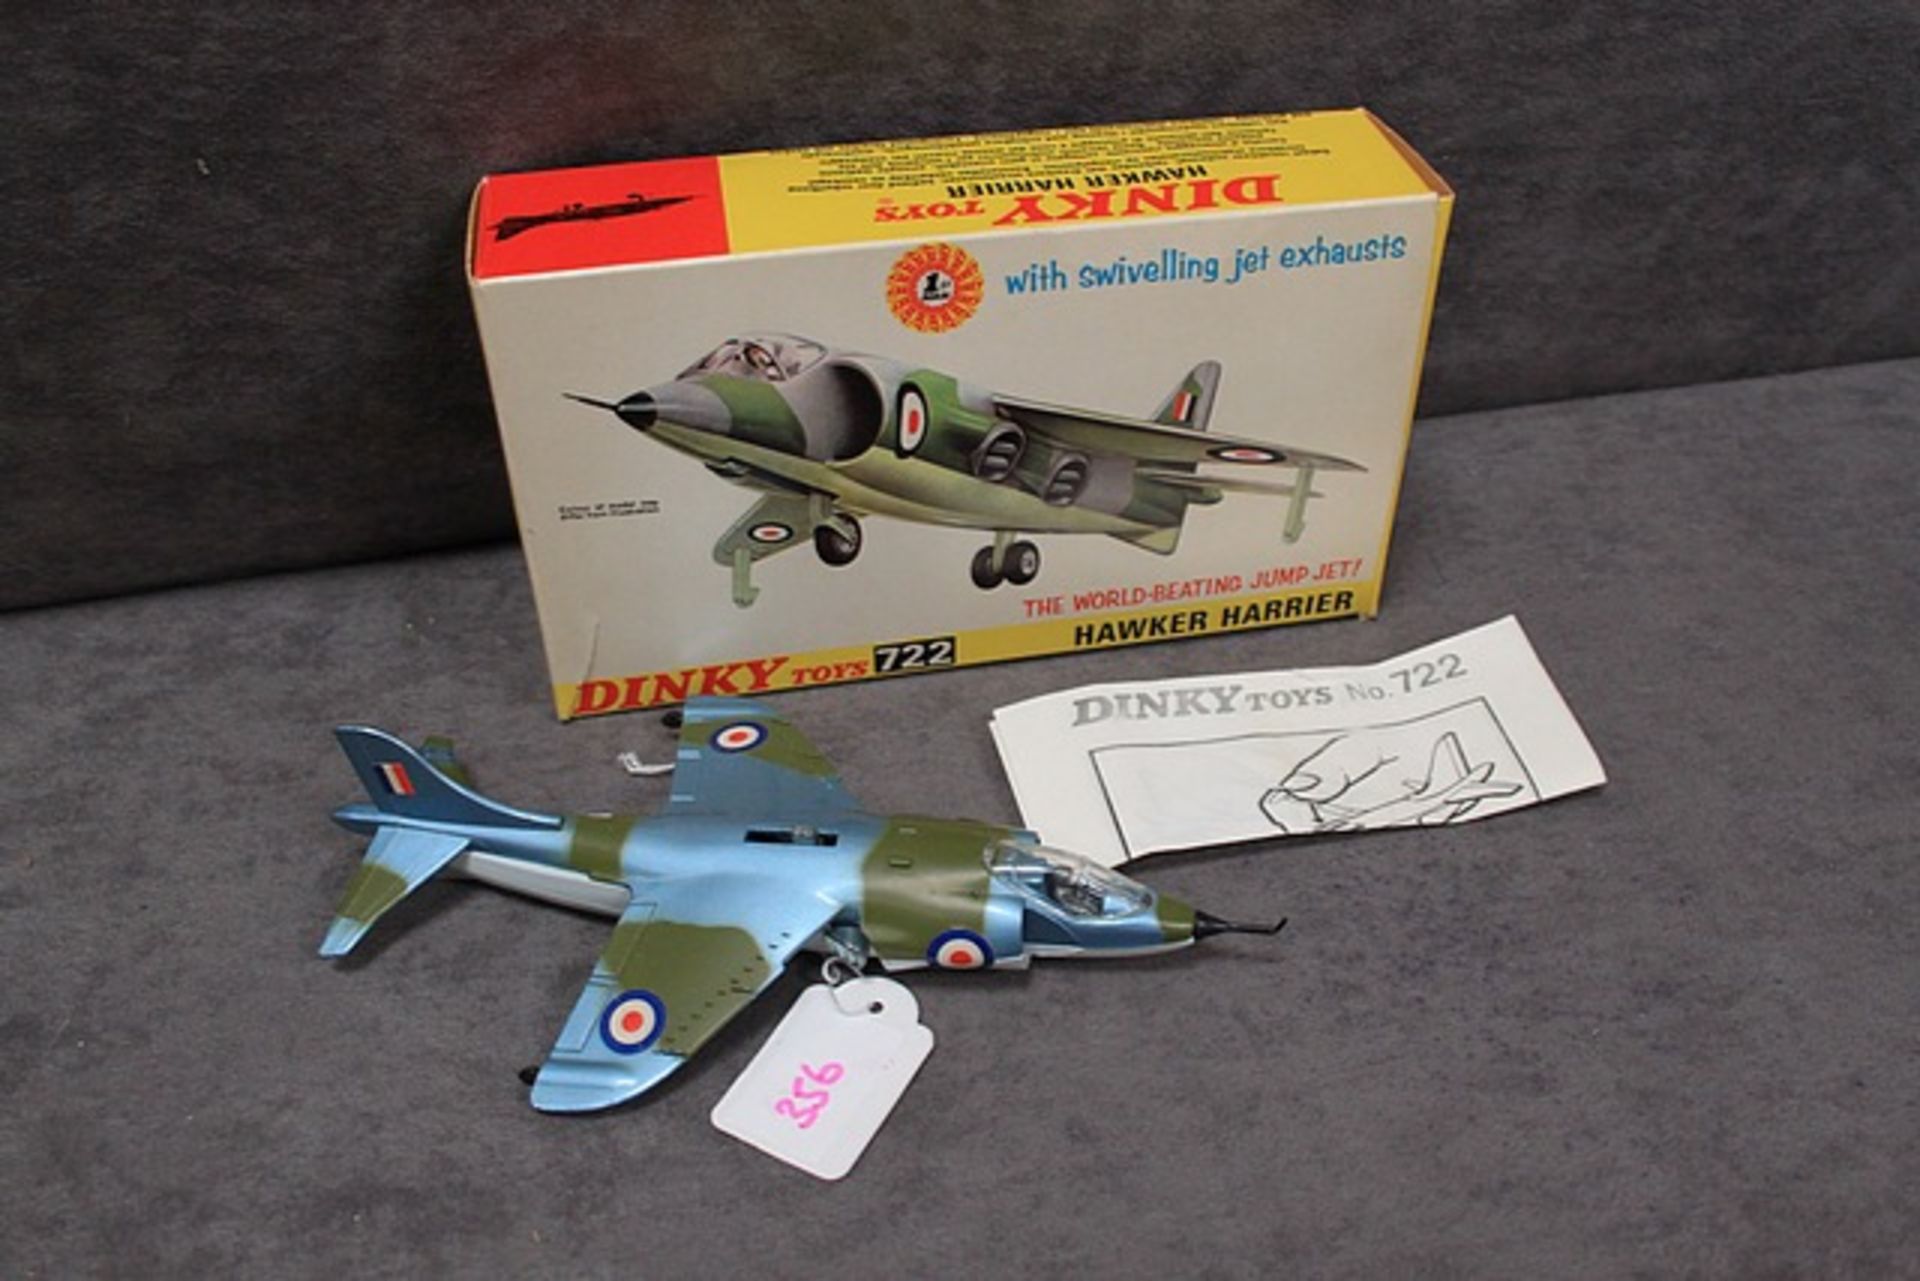 Mint Dinky diecast #722 Hawker Harrier in box - Image 2 of 2